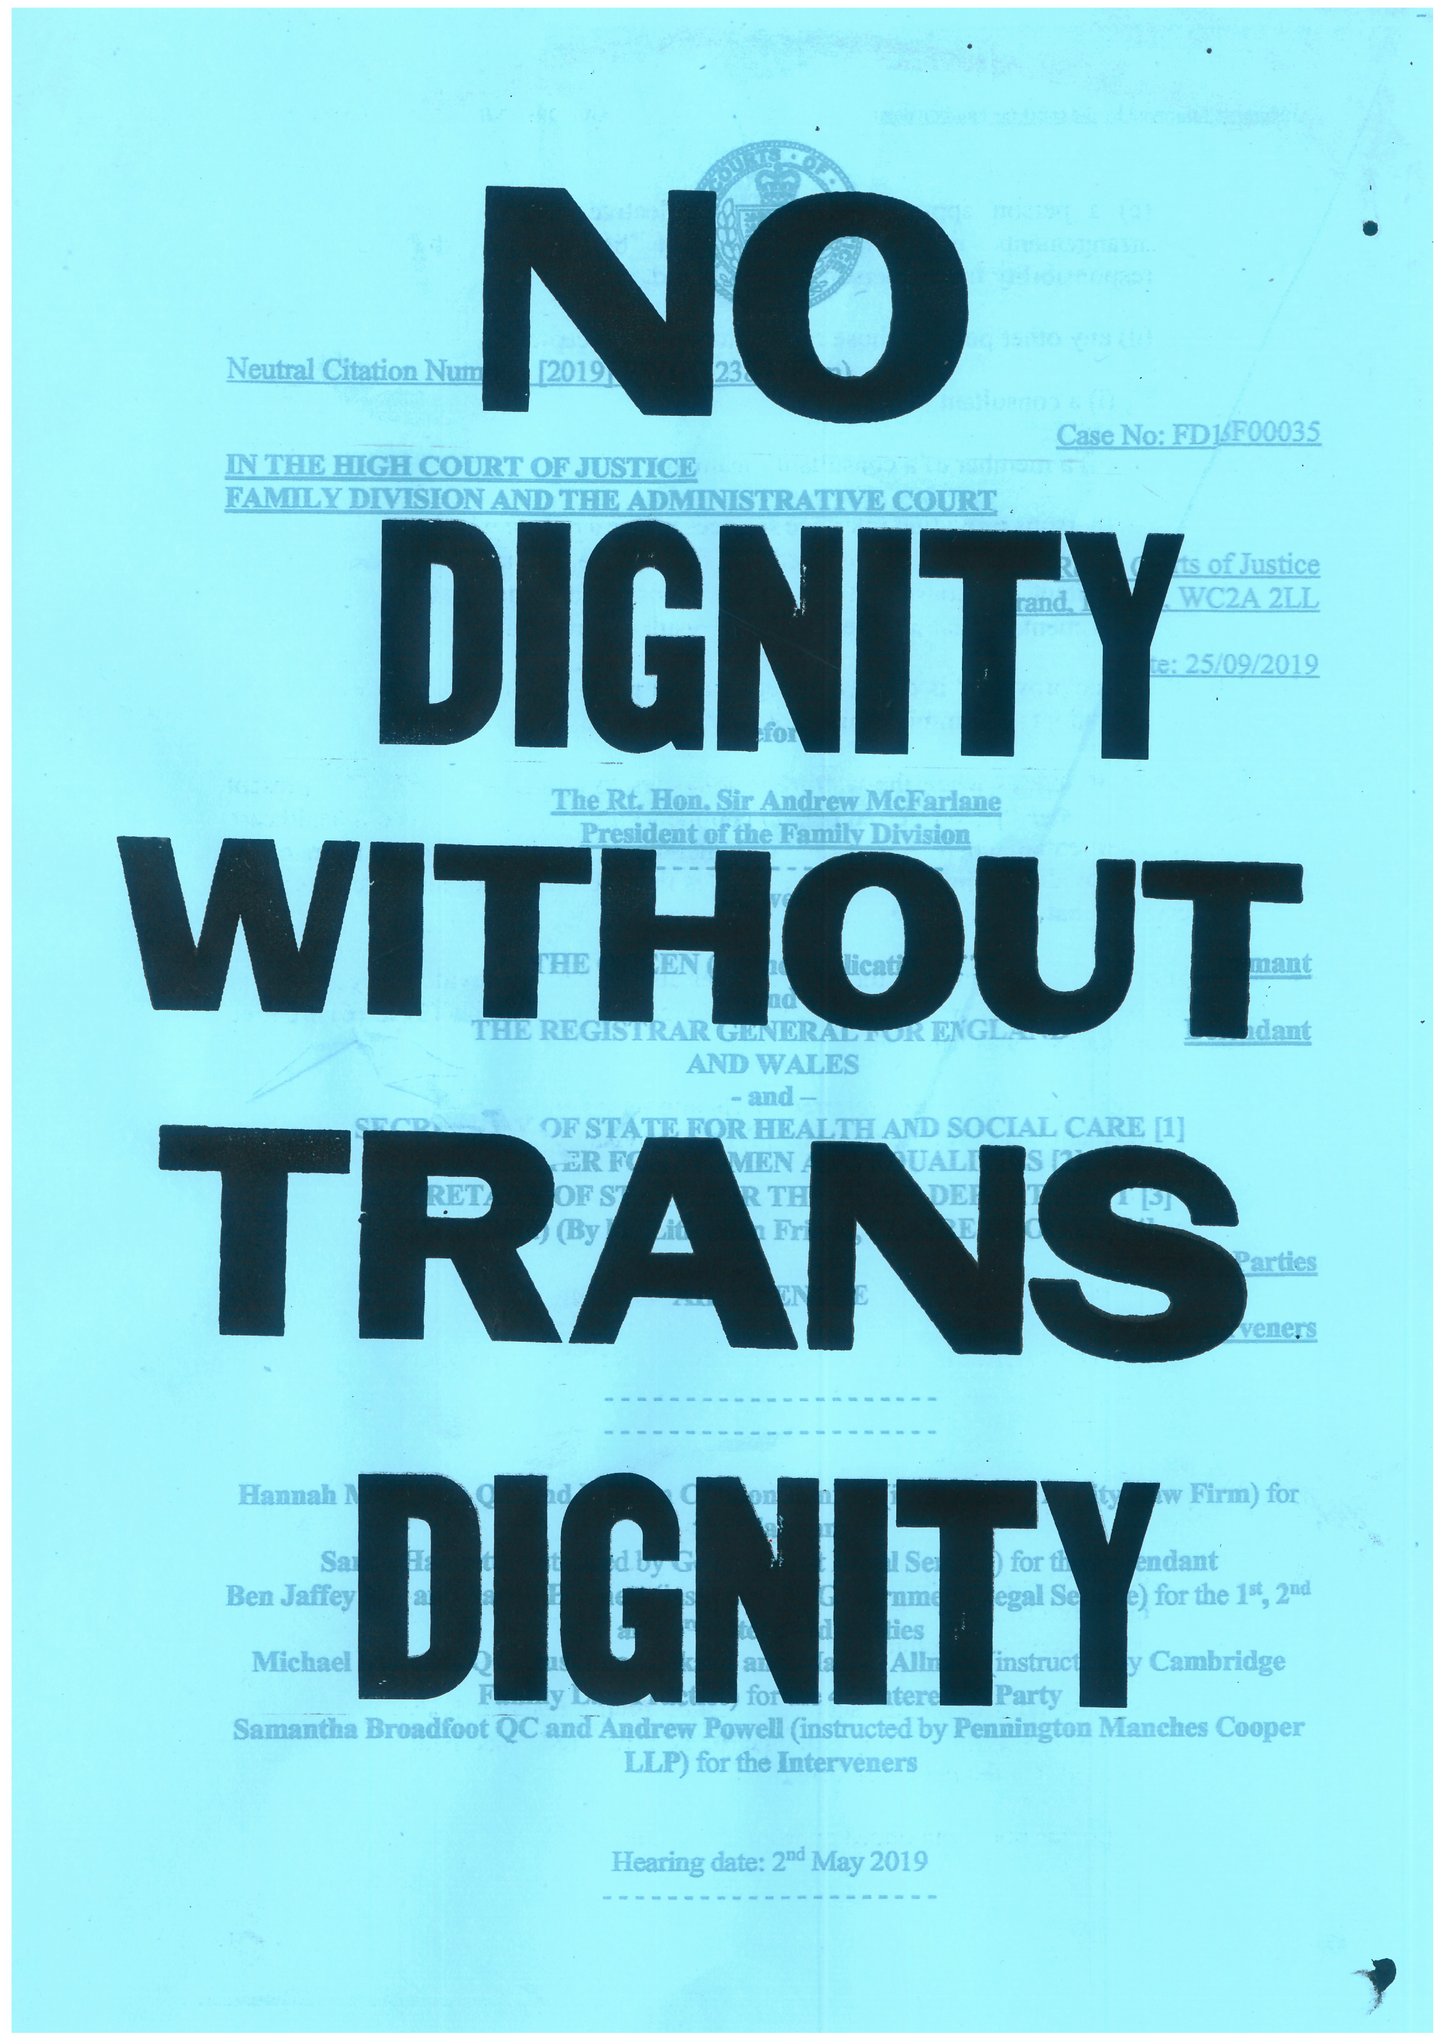 NO PRIDE WITHOUT TRANS PRIDE — Hand Screen Printed A3 Posters